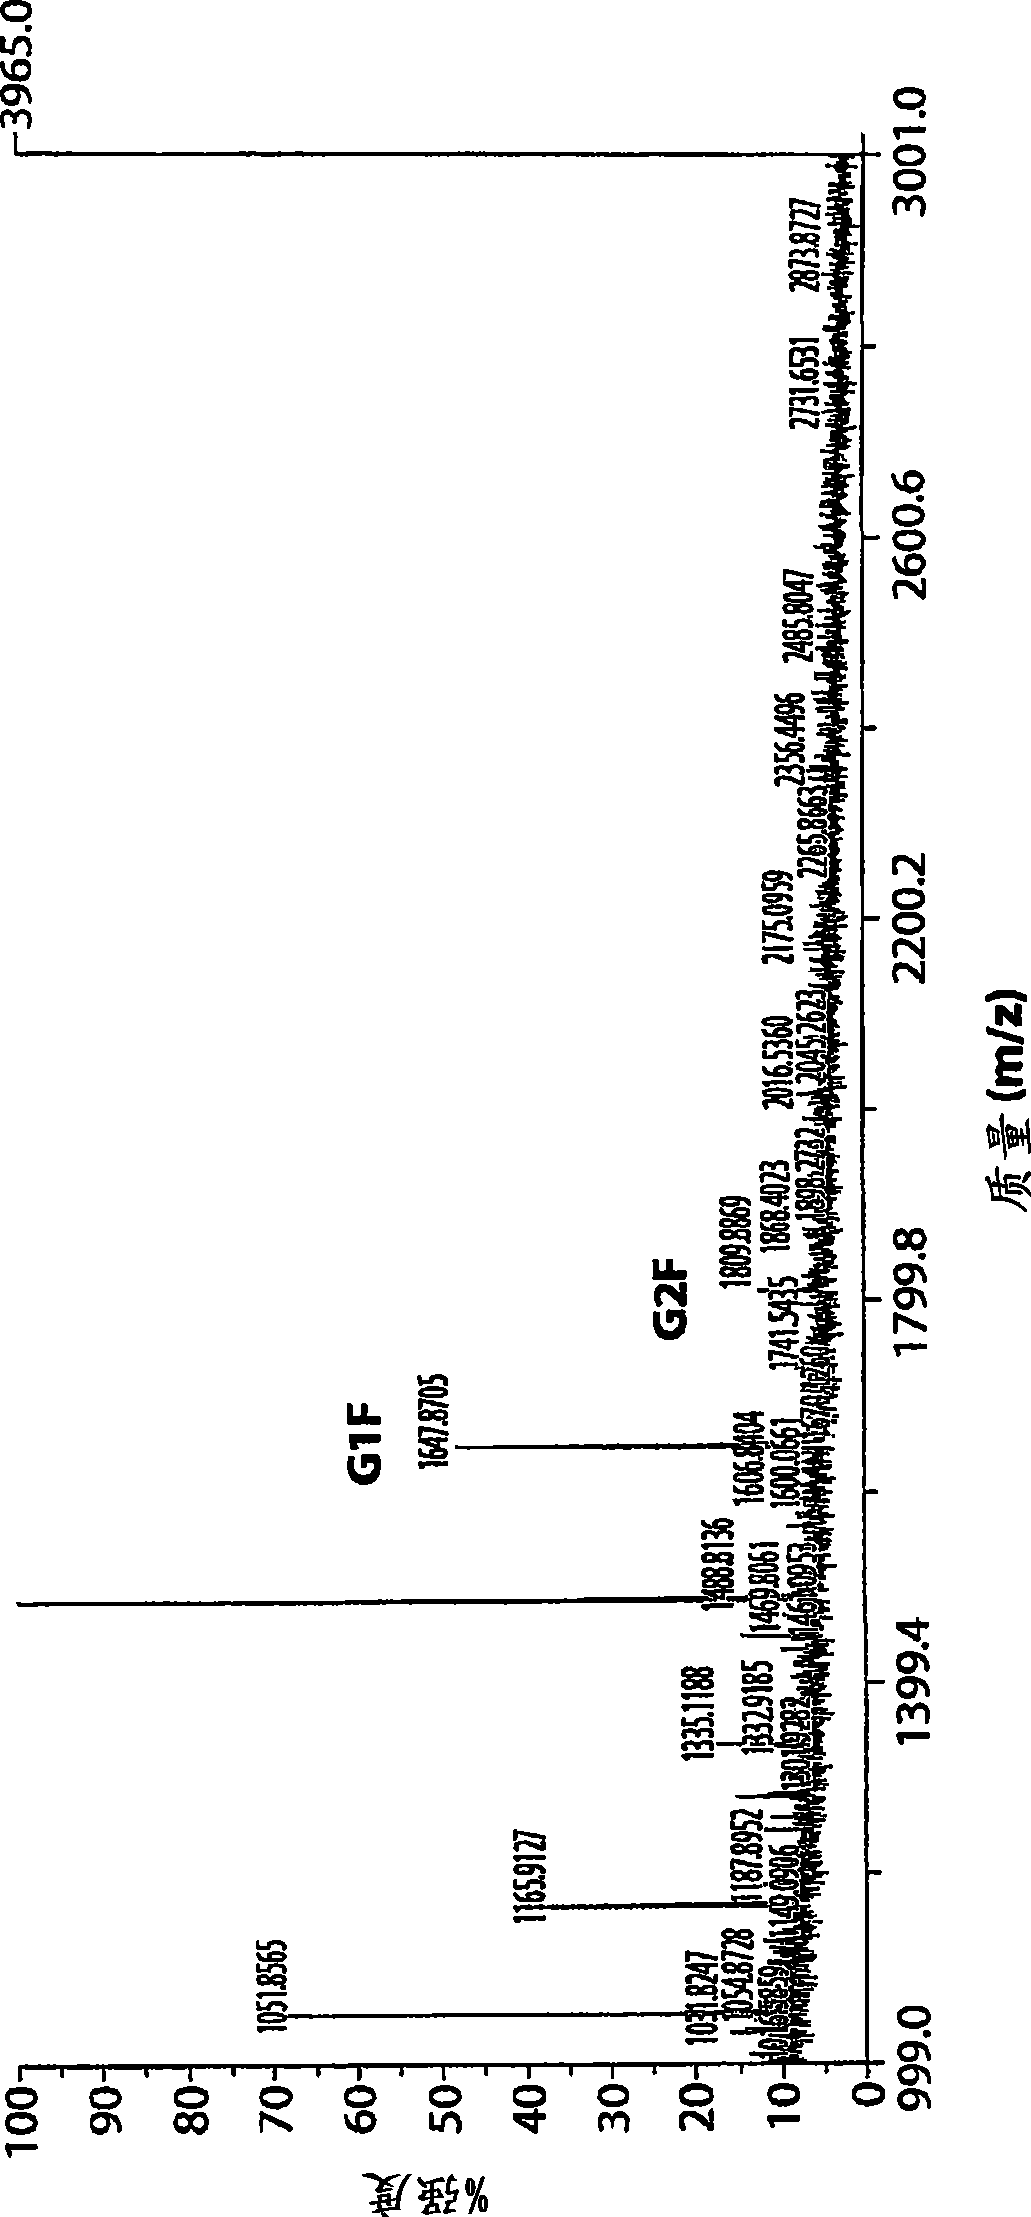 Antibodies with enhanced antibody-dependent cellular cytoxicity activity, methods of their production and use